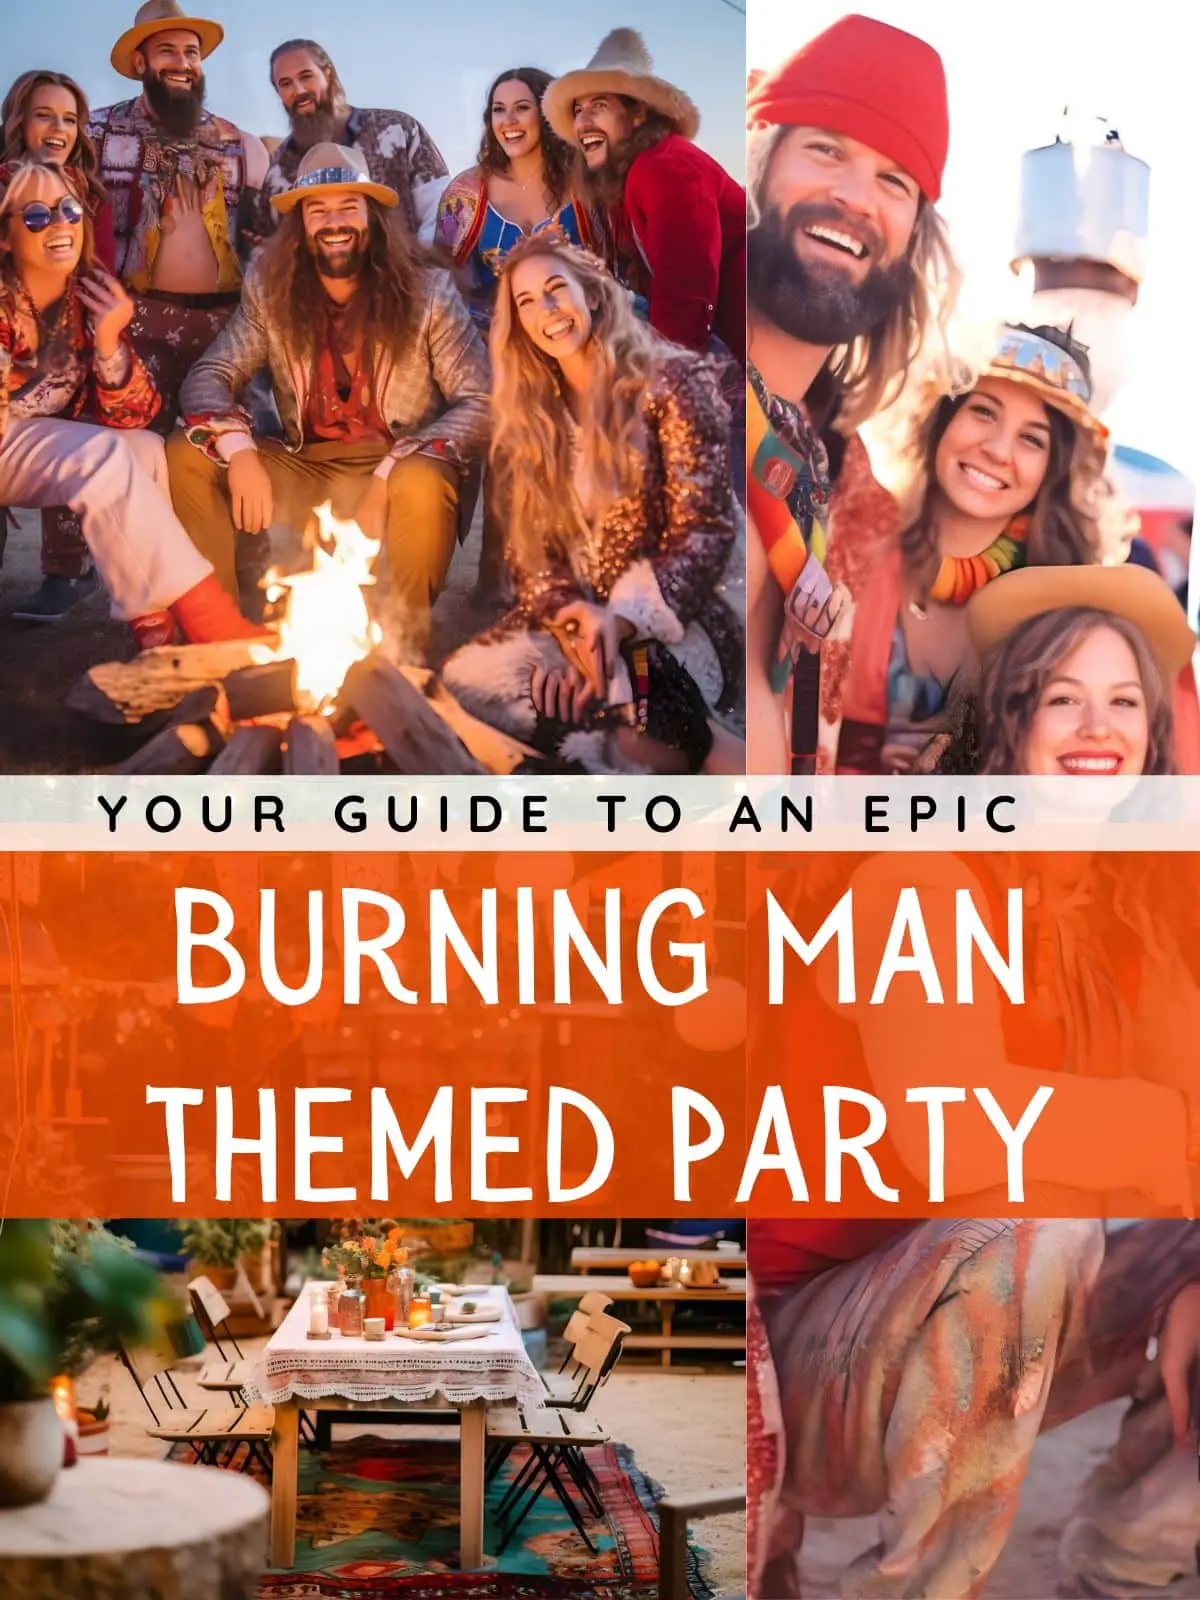 A group of party guests and an outdoor decorated space in costume with the text "your guide to an epic burning man themed party."